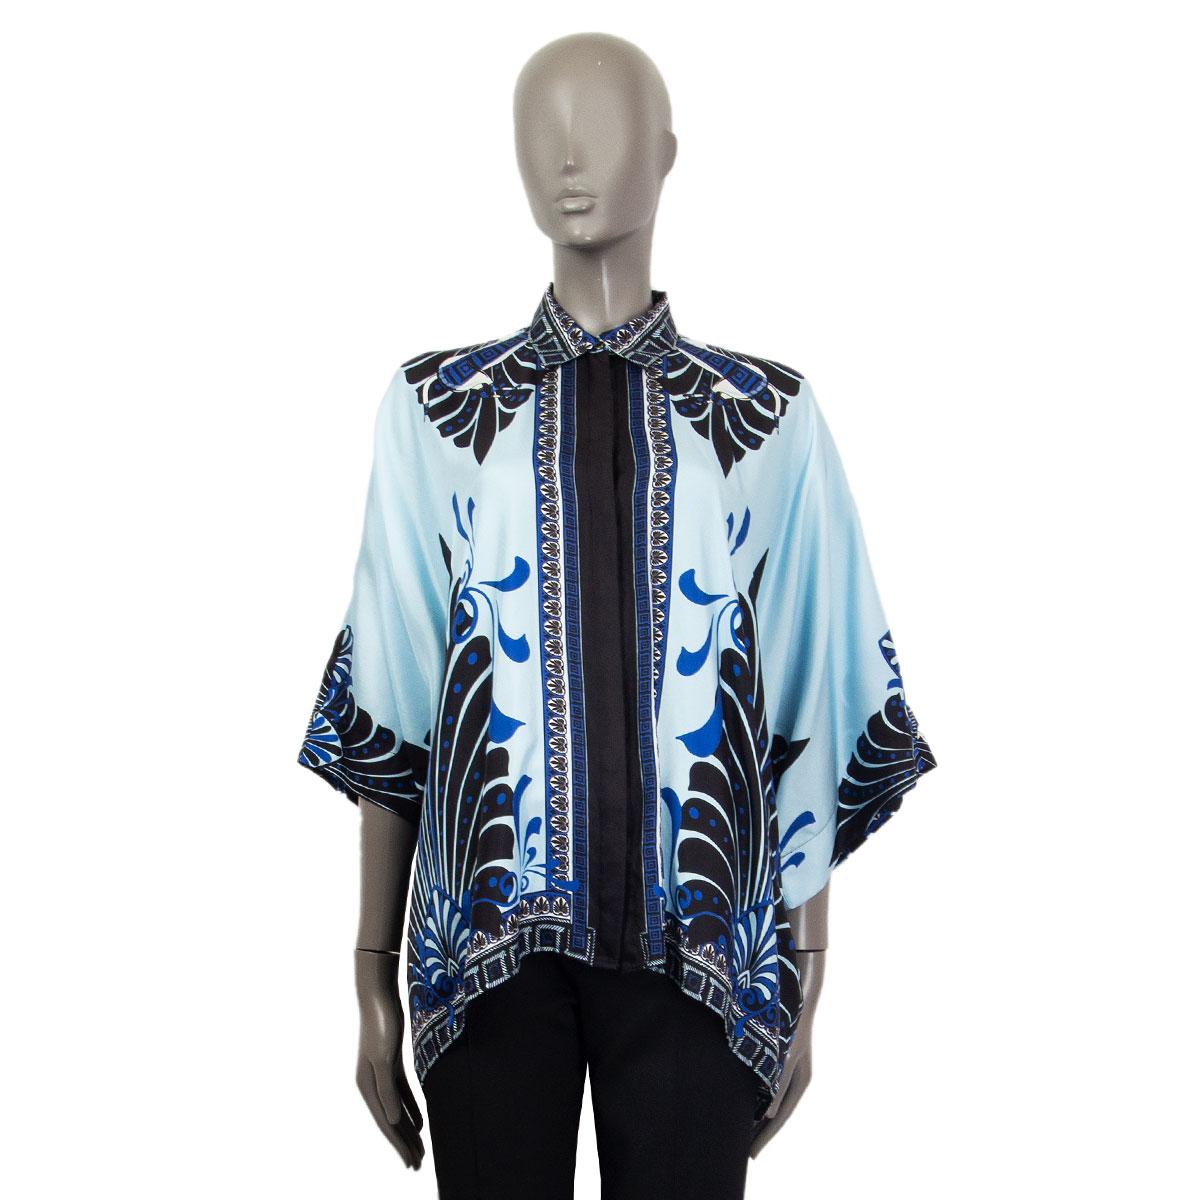 100% authentic Versace oversized printed shirt in black, blue, light blue and white silk twill (100%). Wide sleeves and hidden button front. Has been worn and is in excellent condition. 

Measurements
Tag Size	40
Size	S
Bust To	154cm (60.1in)
Waist